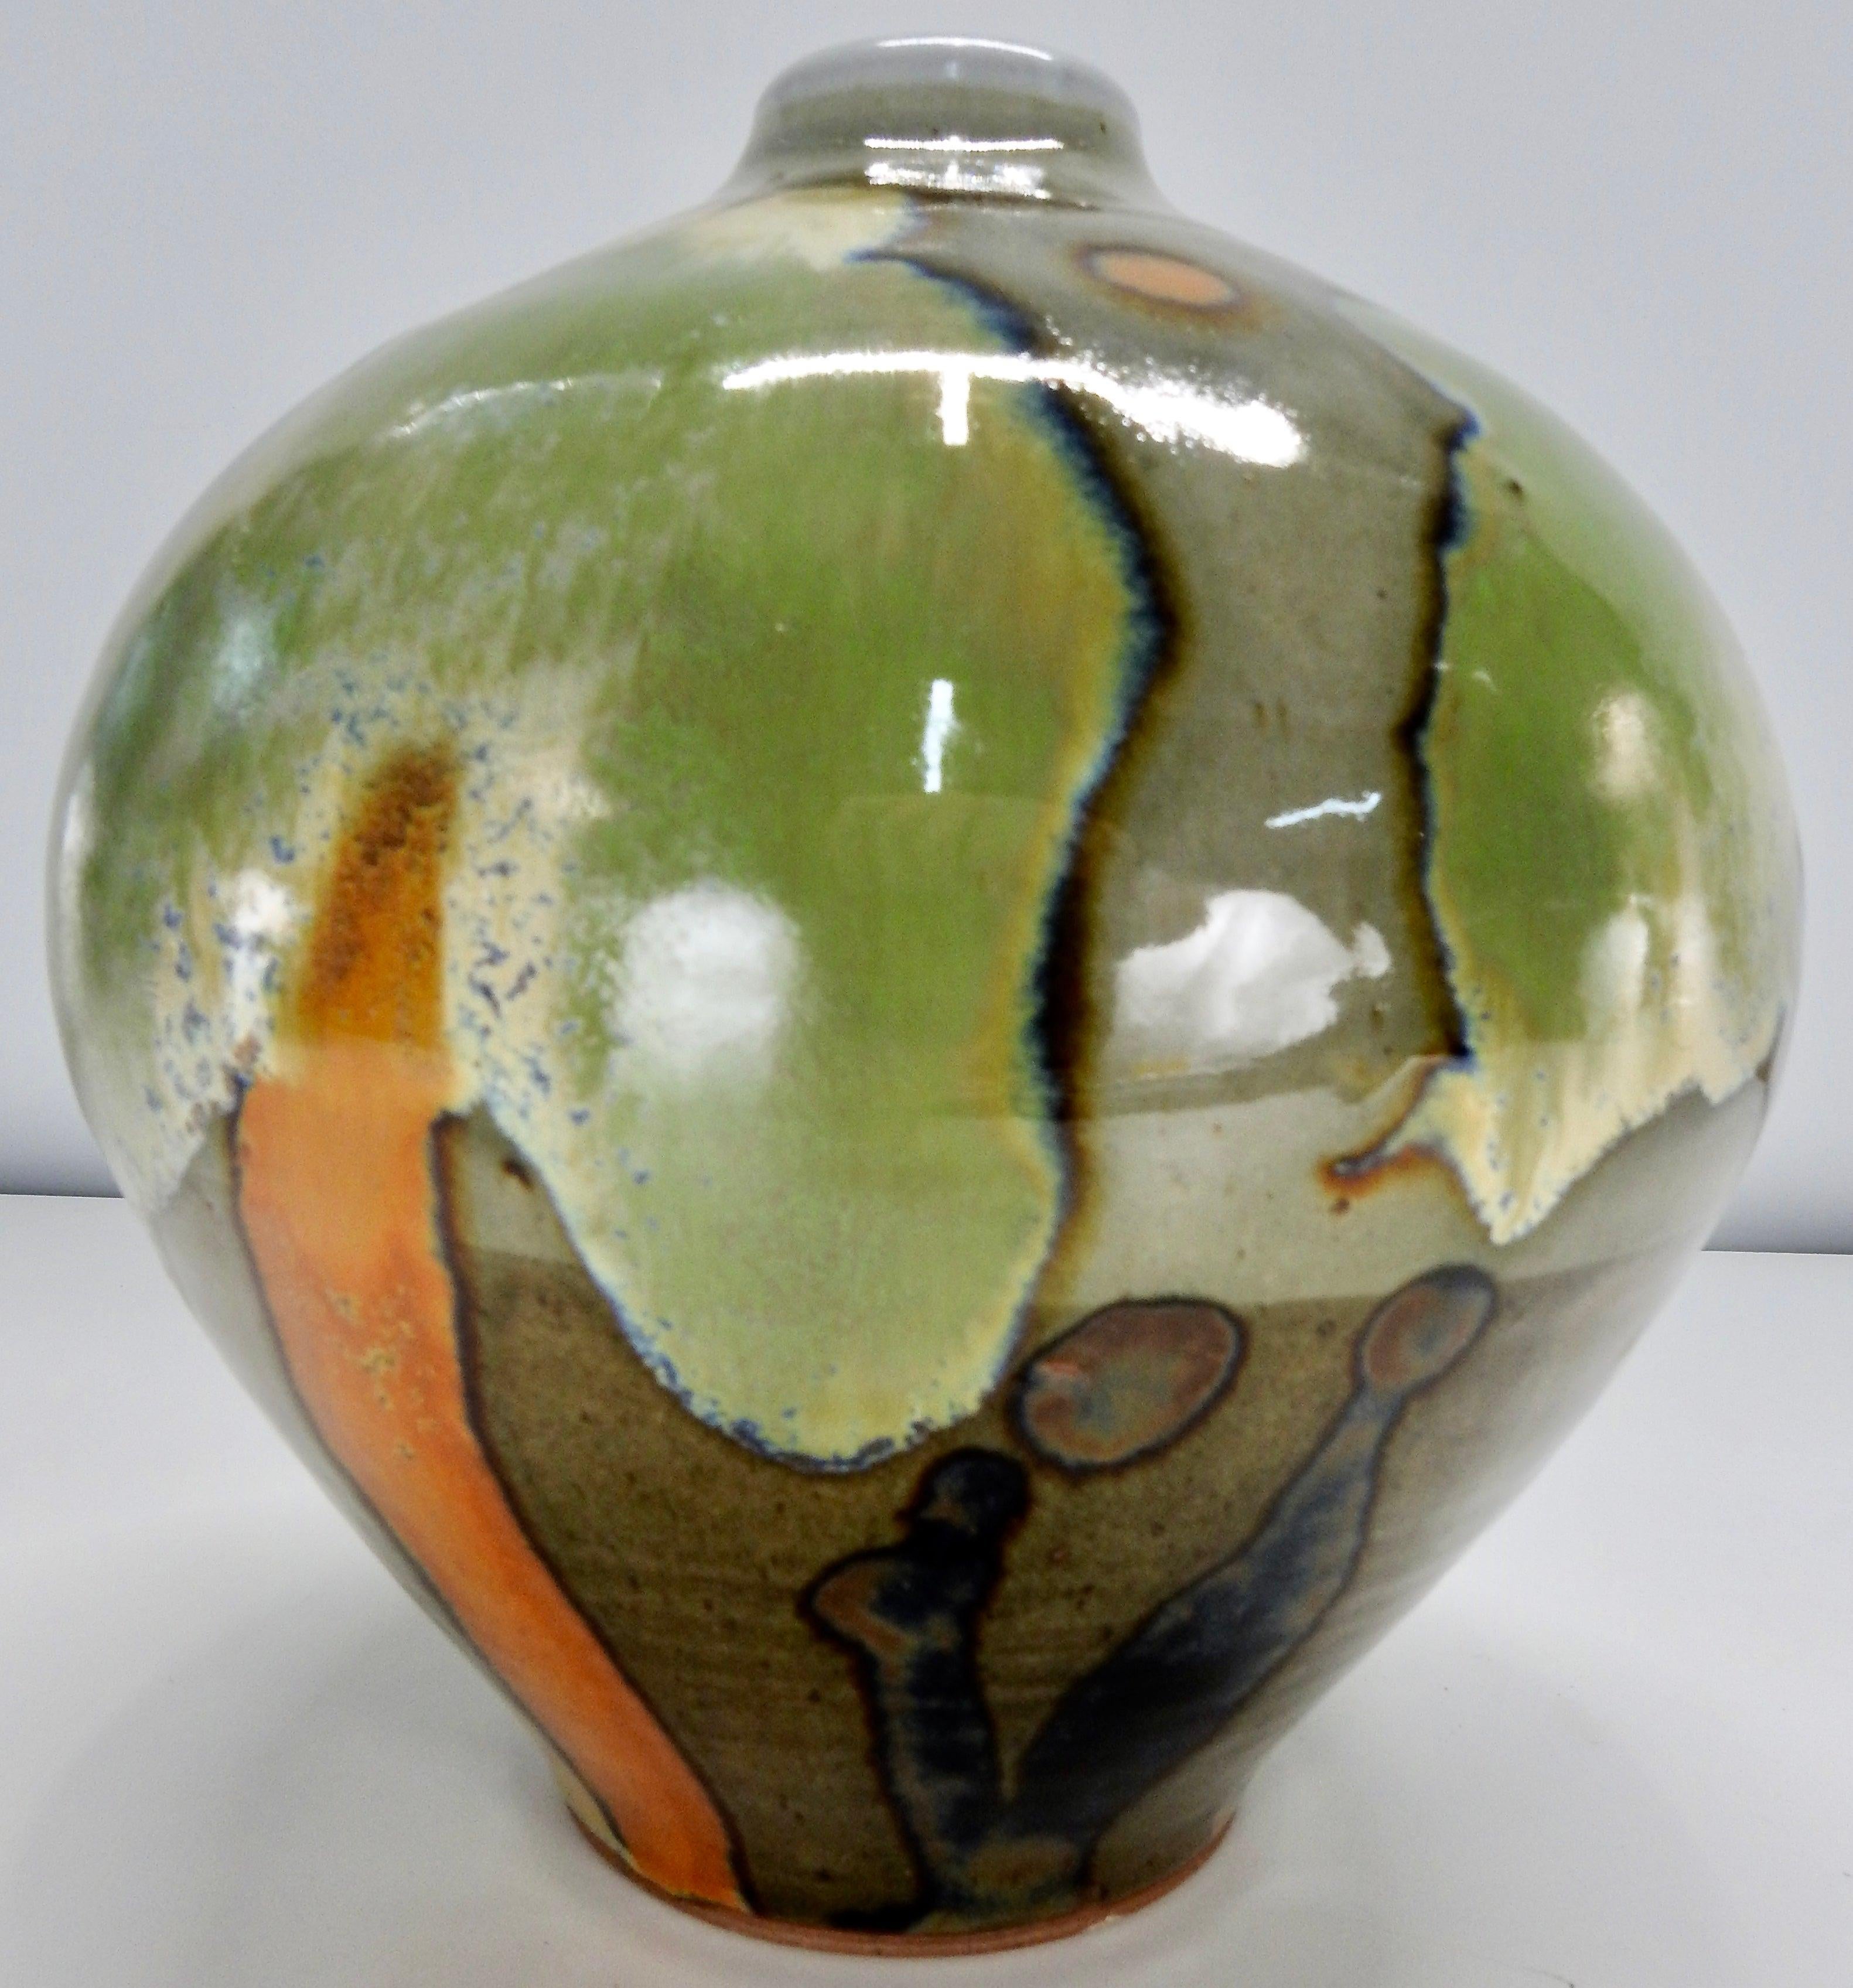 Rich earth tones compliment this hand thrown pottery vase by Sinclair Ashley. If you look closely, you will see tree forms in his design. Ashley was a well-known potter and instructor from Chattanooga, Tennessee. He primarily used colors such as